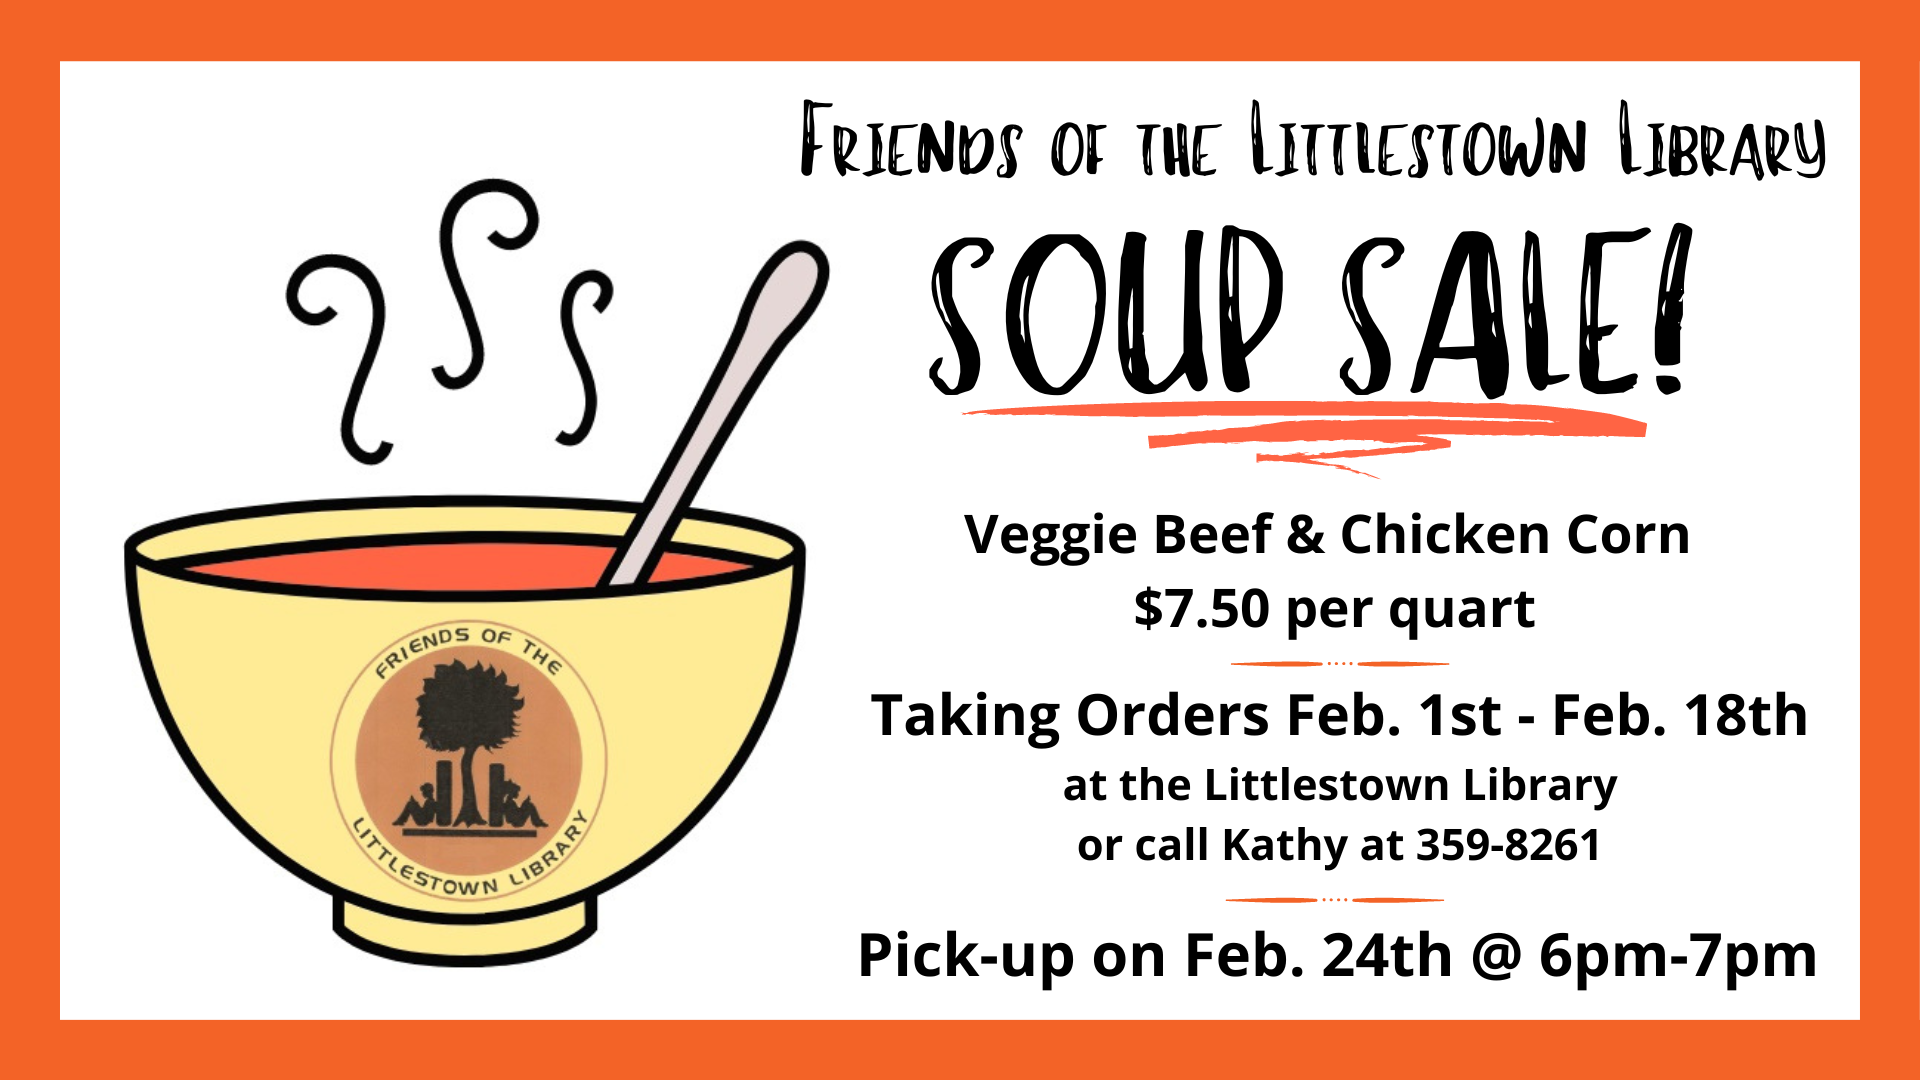 February 2023 Friends of the Littlestown Library Soup Sale! Orders open Feb 1st through Feb 18th. Pick up is 6-7pm on Feb. 24th.